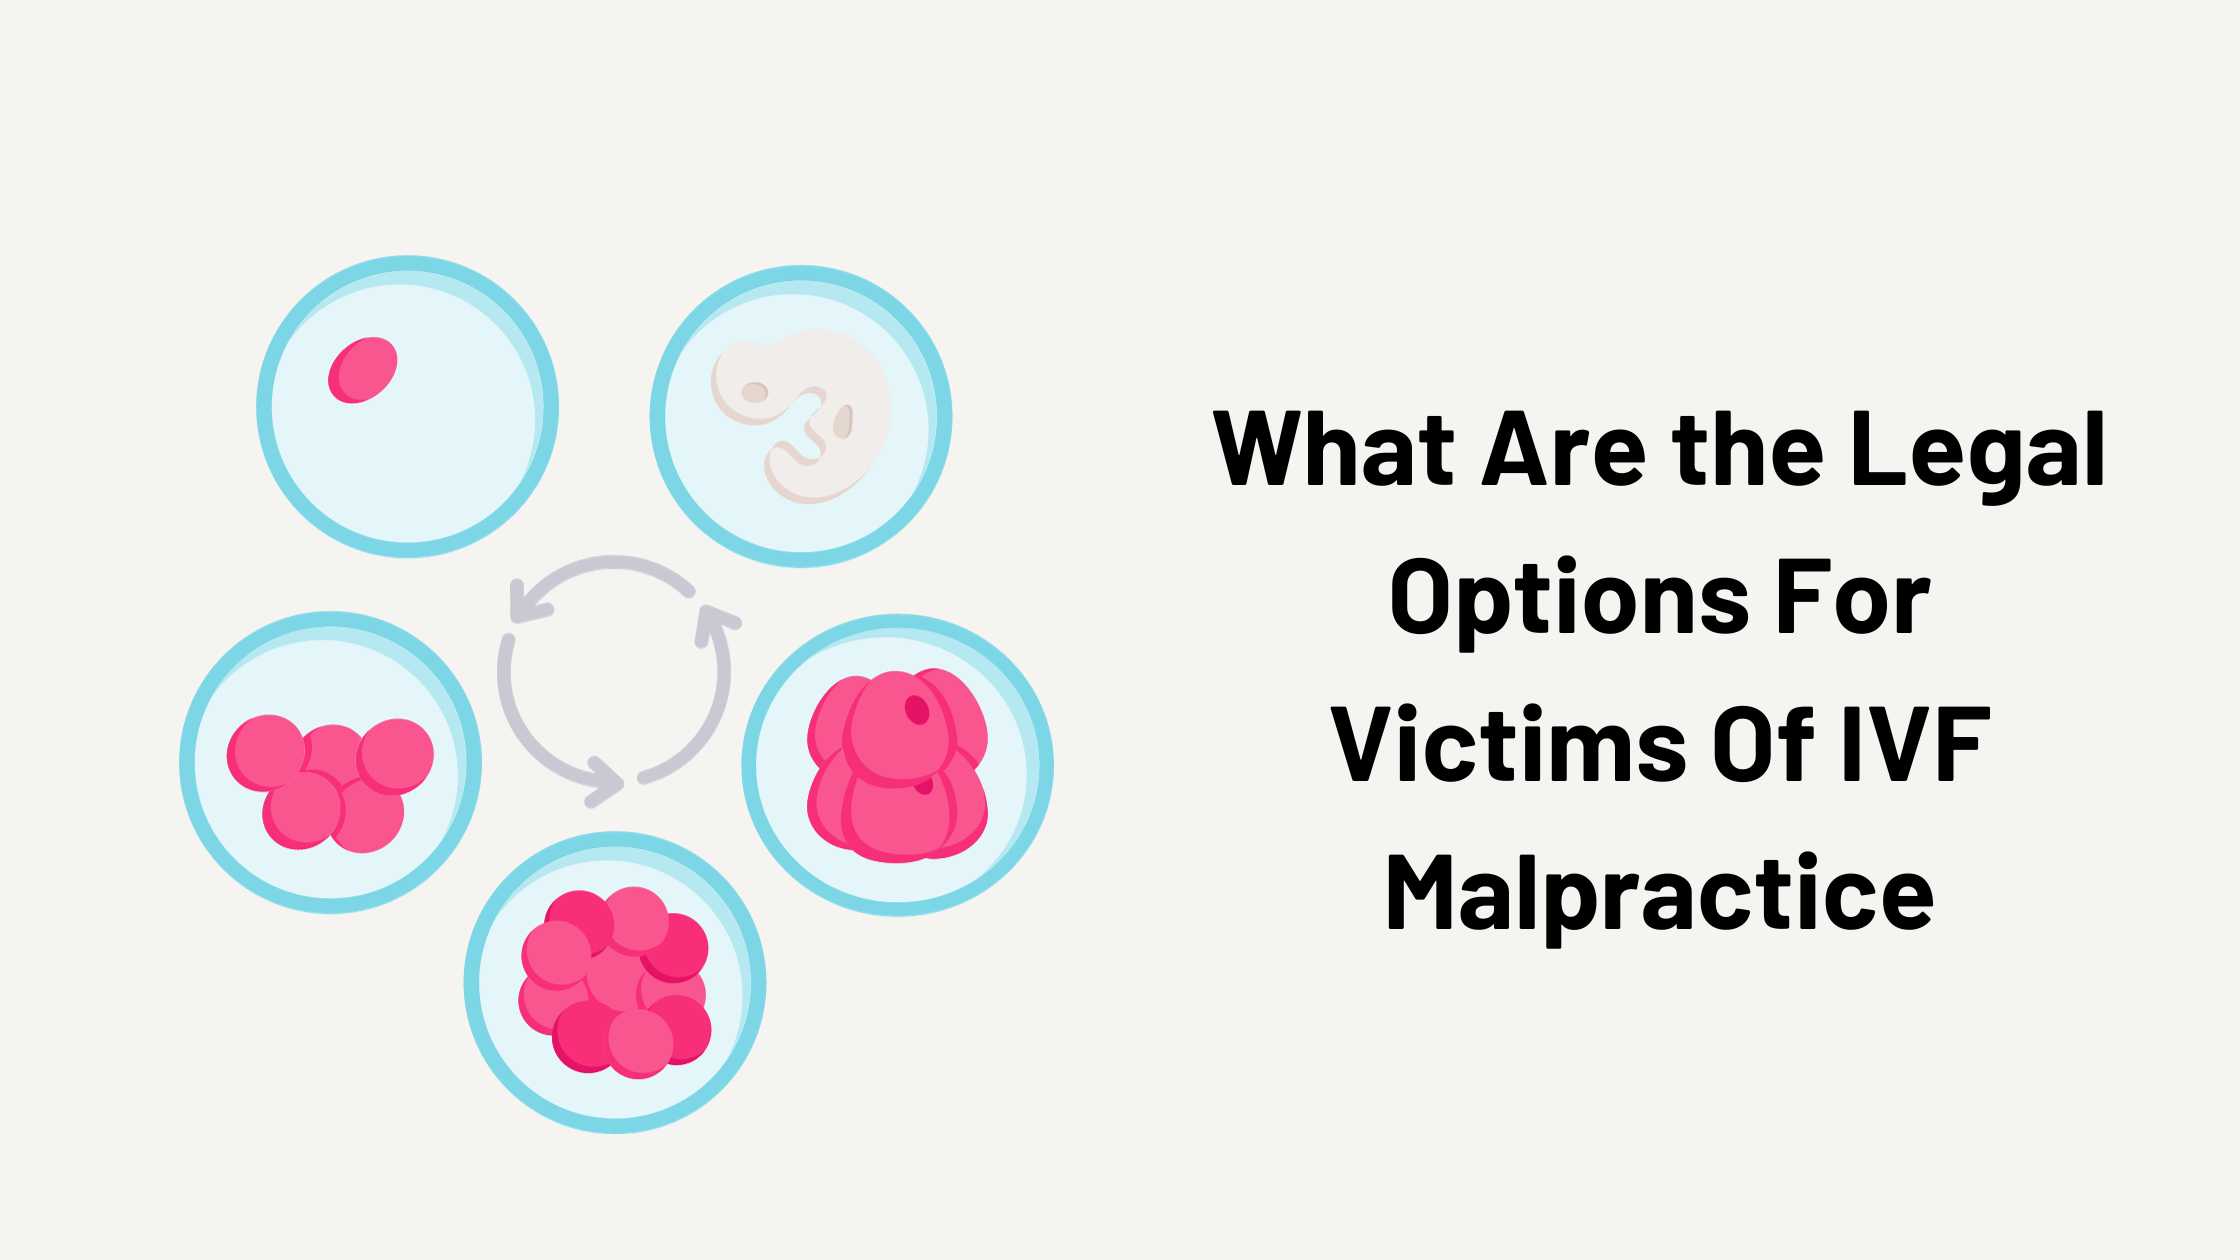 What Are the Legal Options For Victims Of IVF Malpractice